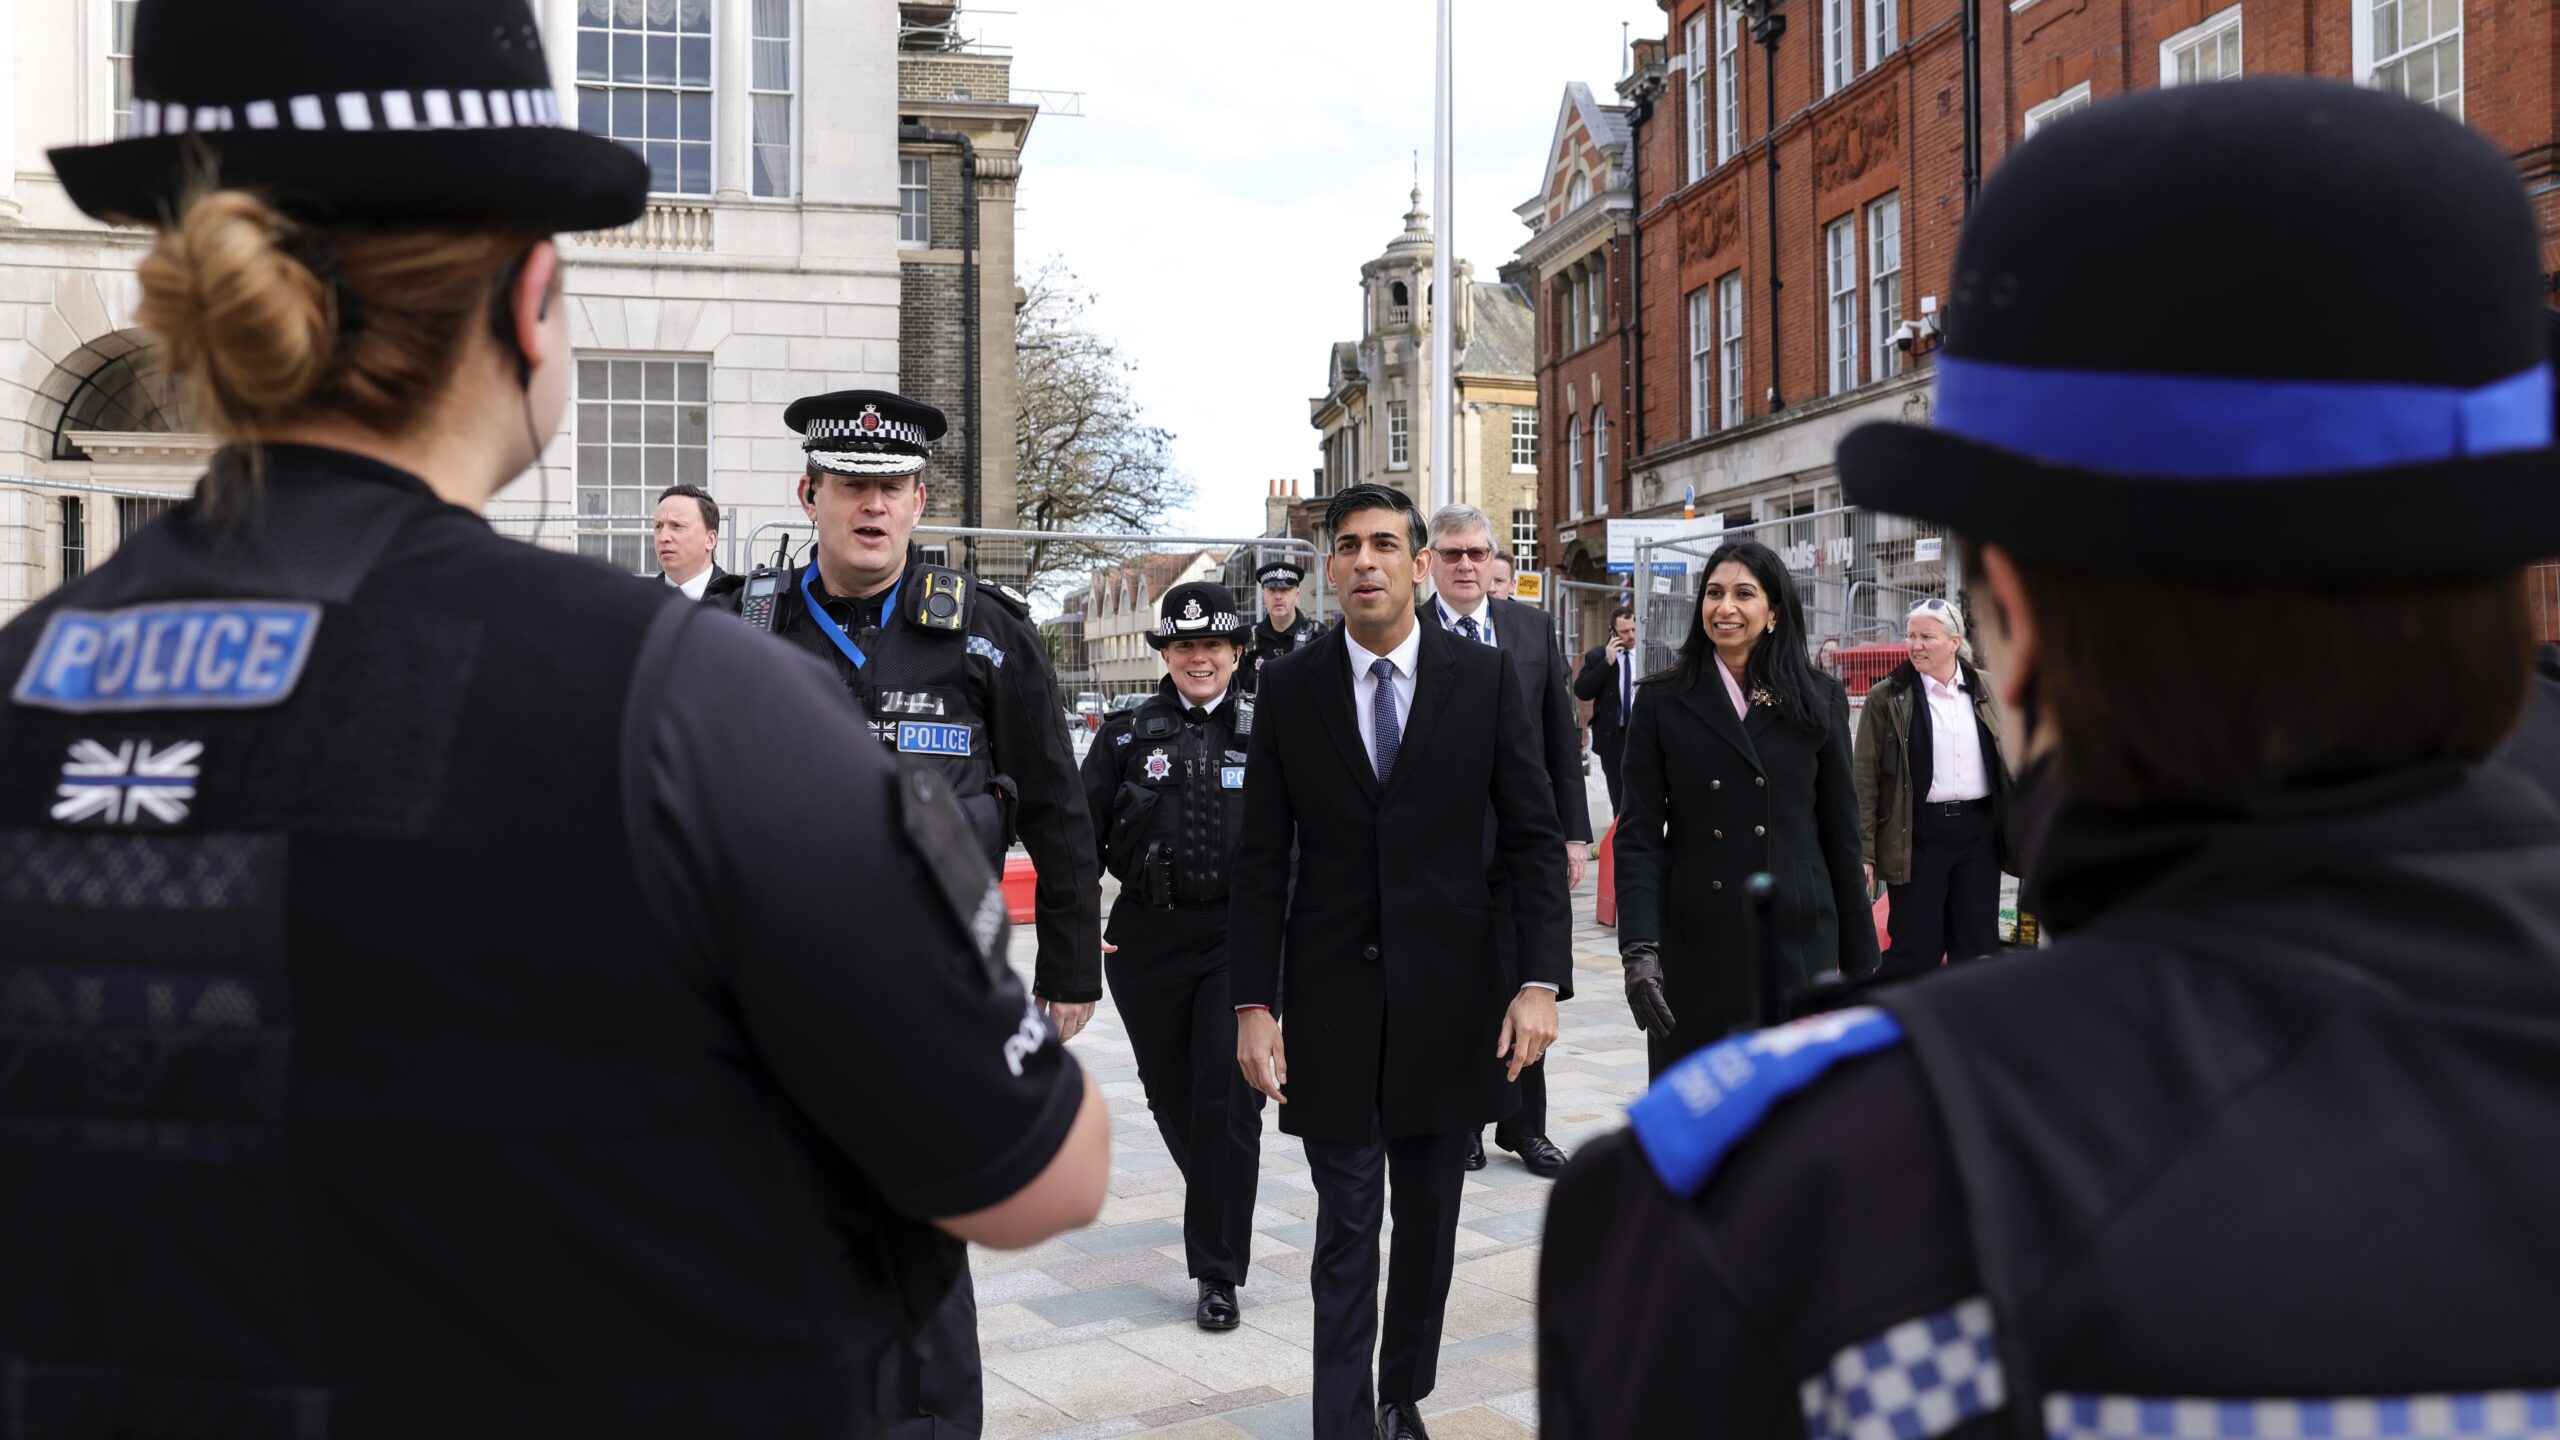 Prime Minister Rishi Sunak walks with Police Officers through Chelmsford high street to highlight government policy on Anti Social Behaviour looking toward 2 police officers in the foreground